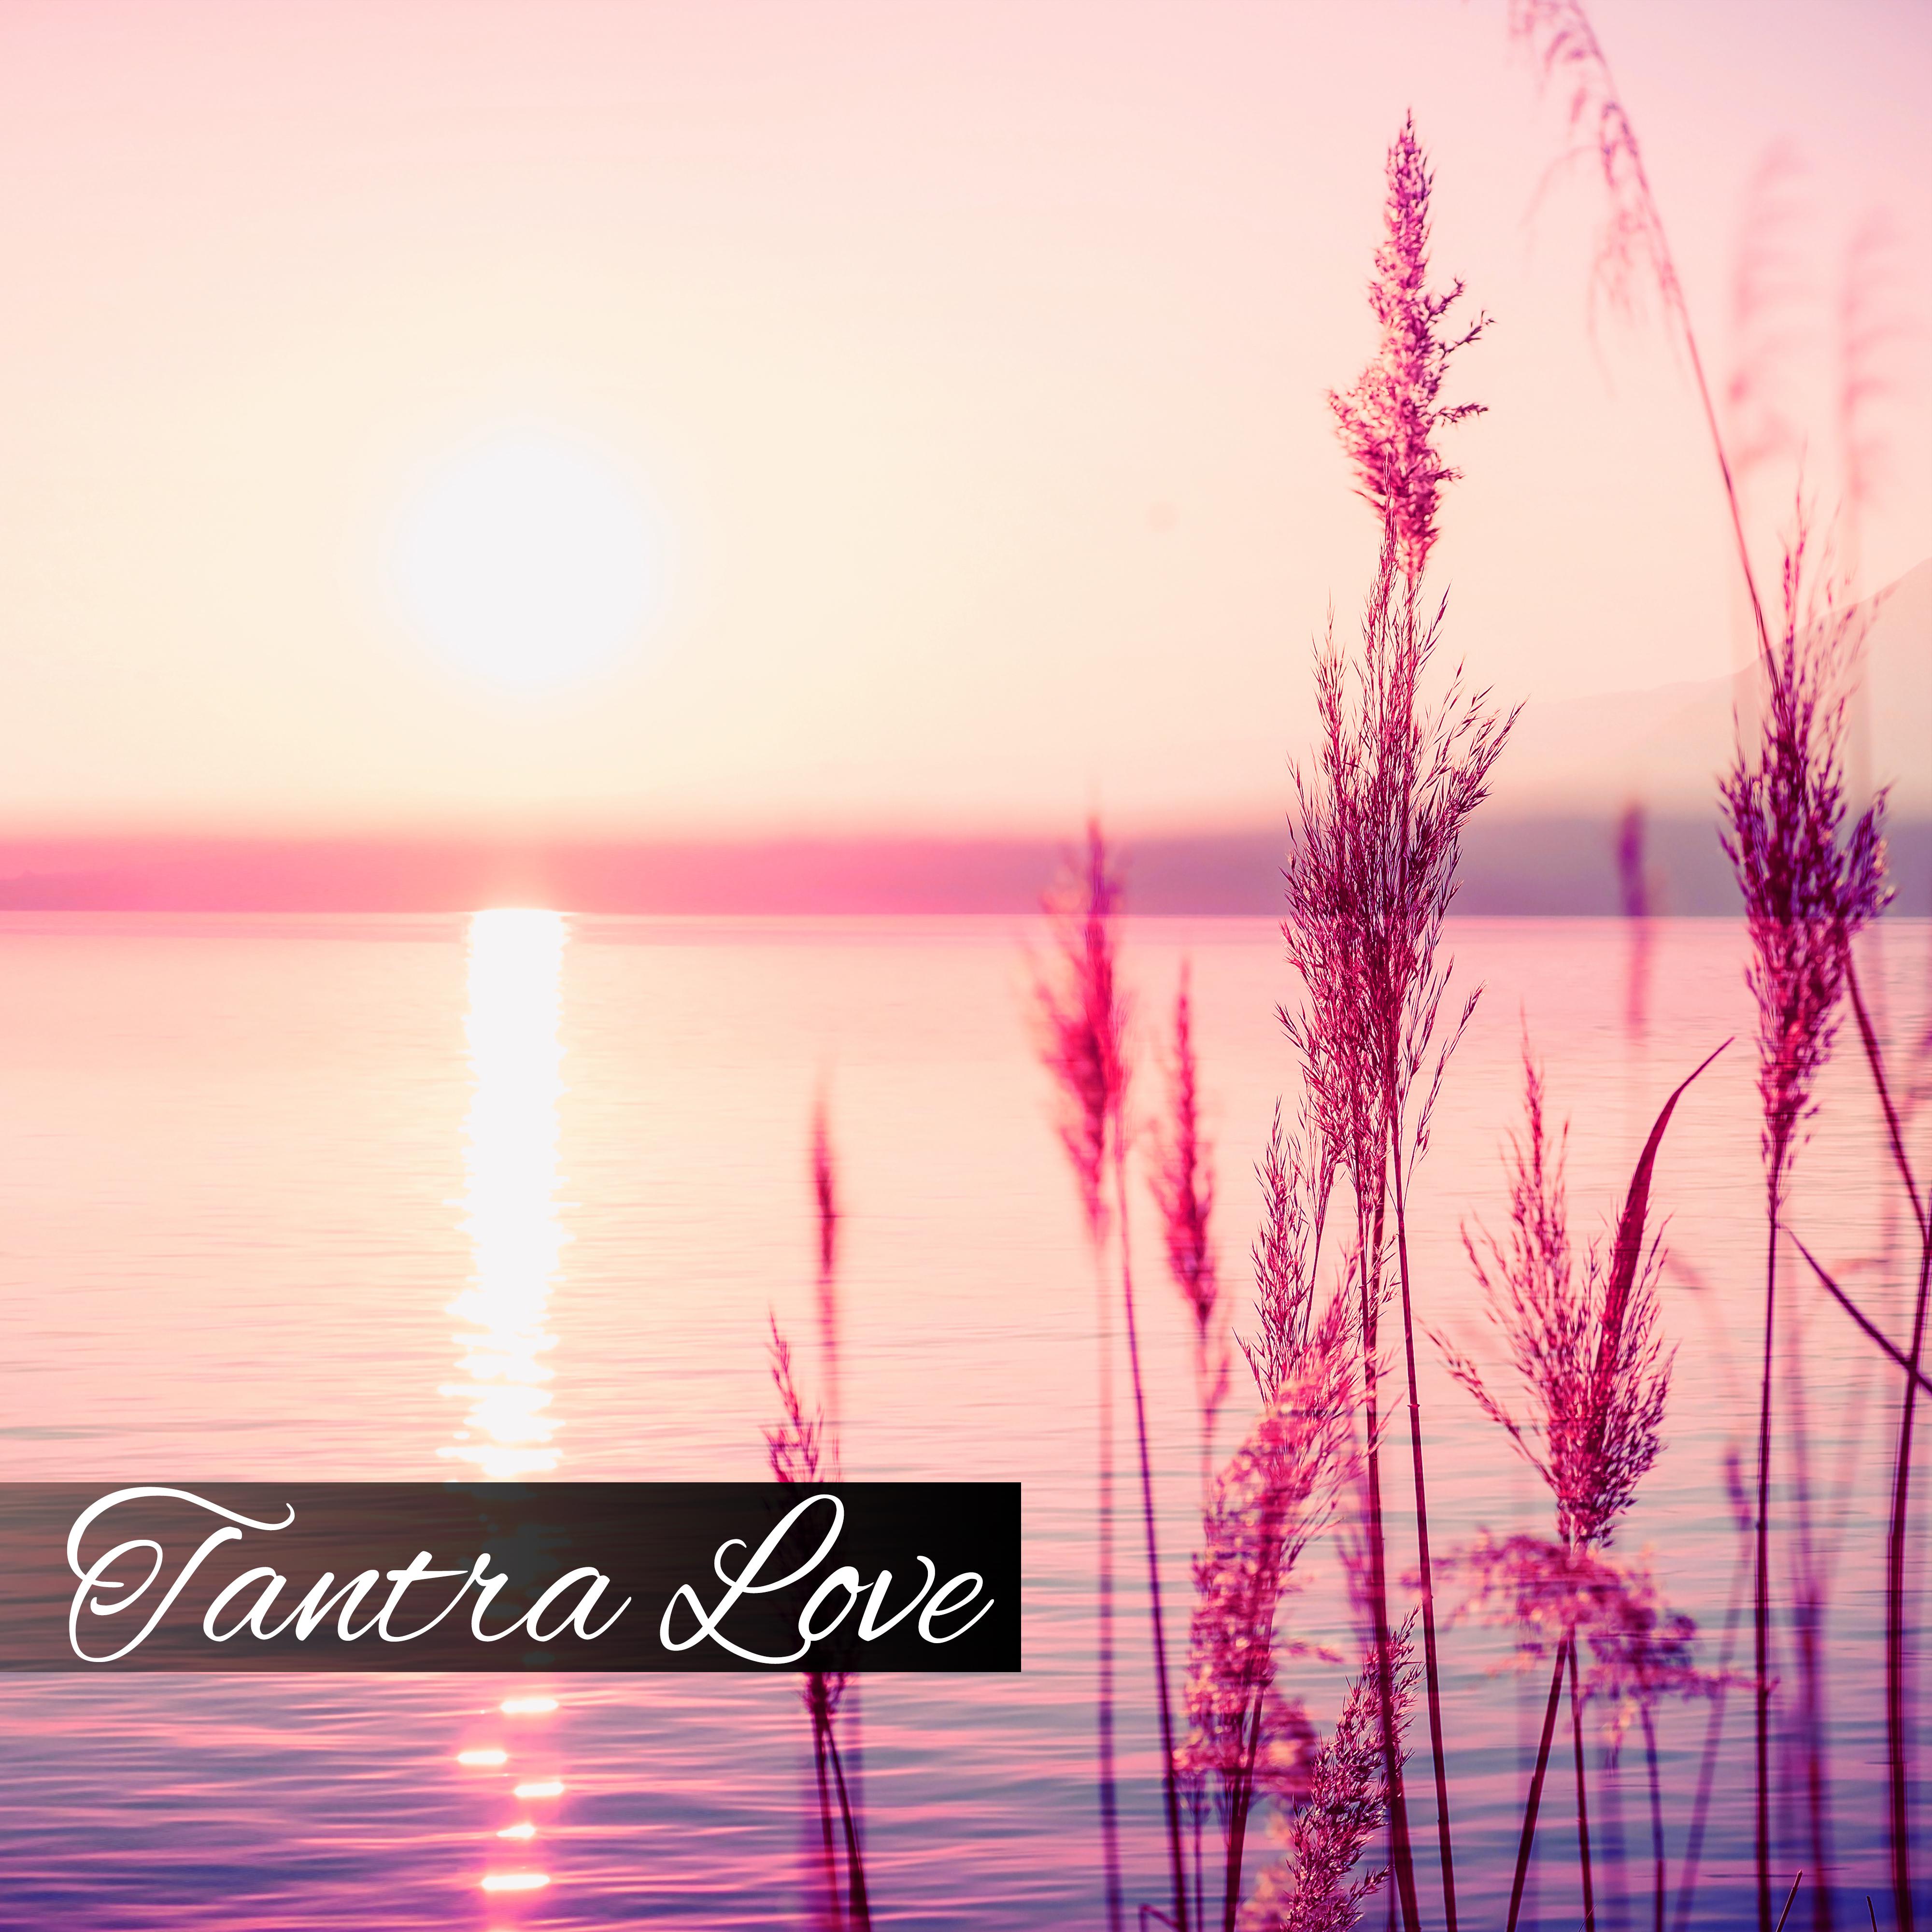 Tantra Love - Soothing Sounds for Serenity Spa, Total Relax and Wellbeing